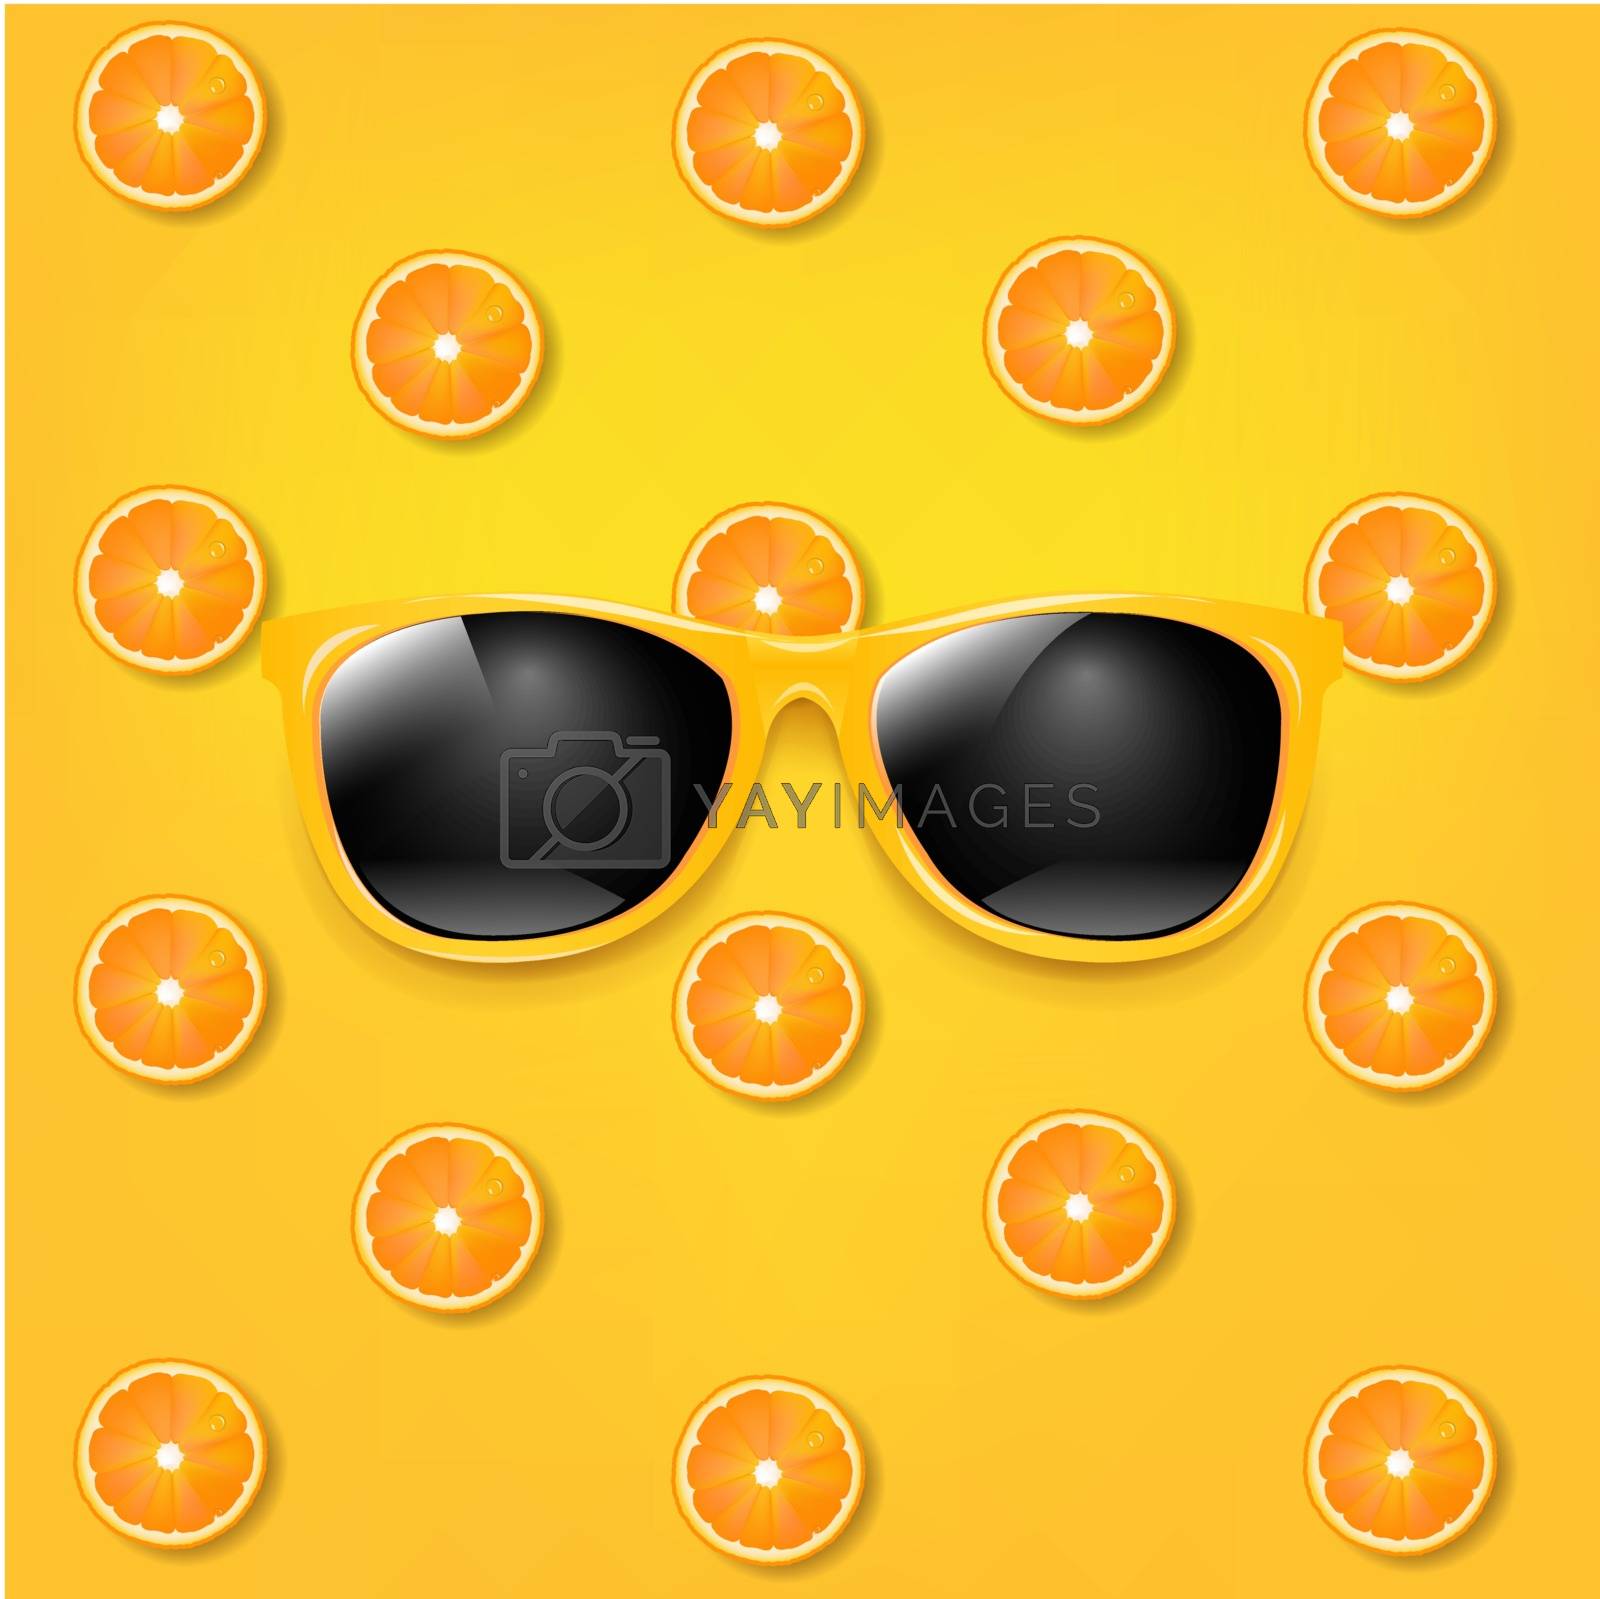 Royalty free image of Sunglasses With Orange And Yellow Background by cammep